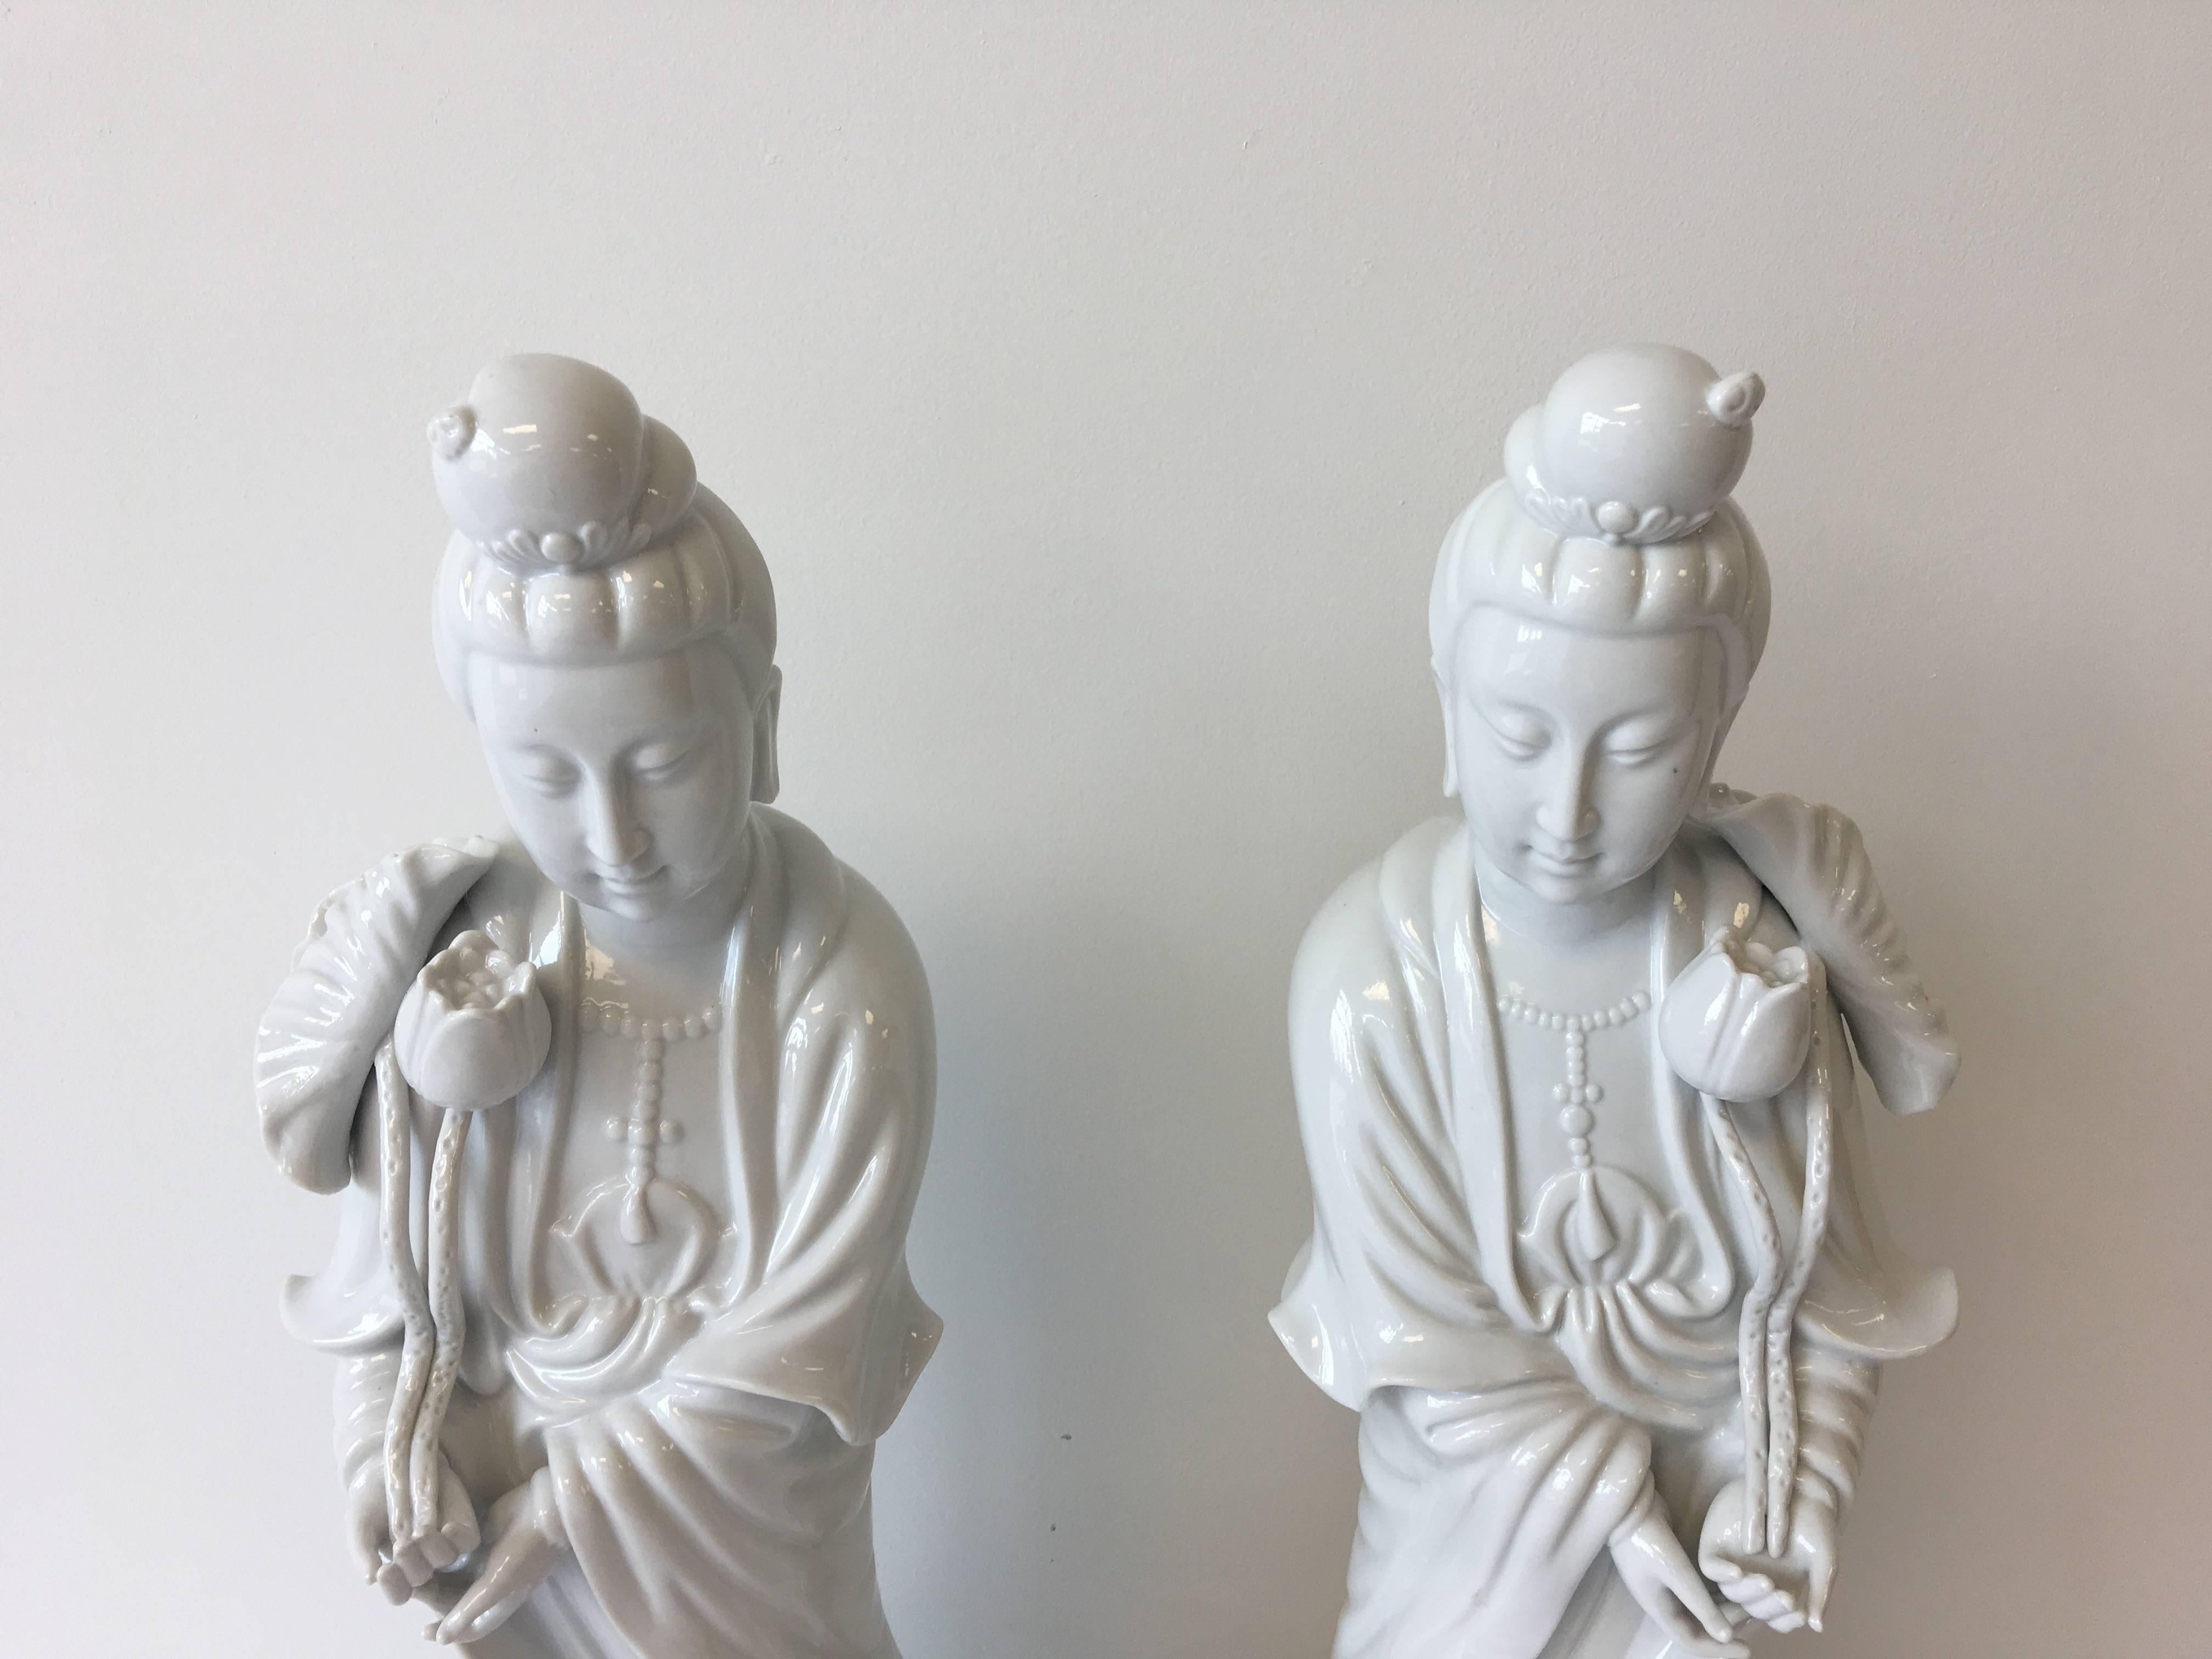 An absolutely stunning, pair of antique Blanc de Chine statues of Guan Yin. 20th century, circa 1960's. The Buddhist goddess of compassion, mercy, and kindness is truly embodied in these fabulous, pure-white porcelain pieces! They stand tall (24